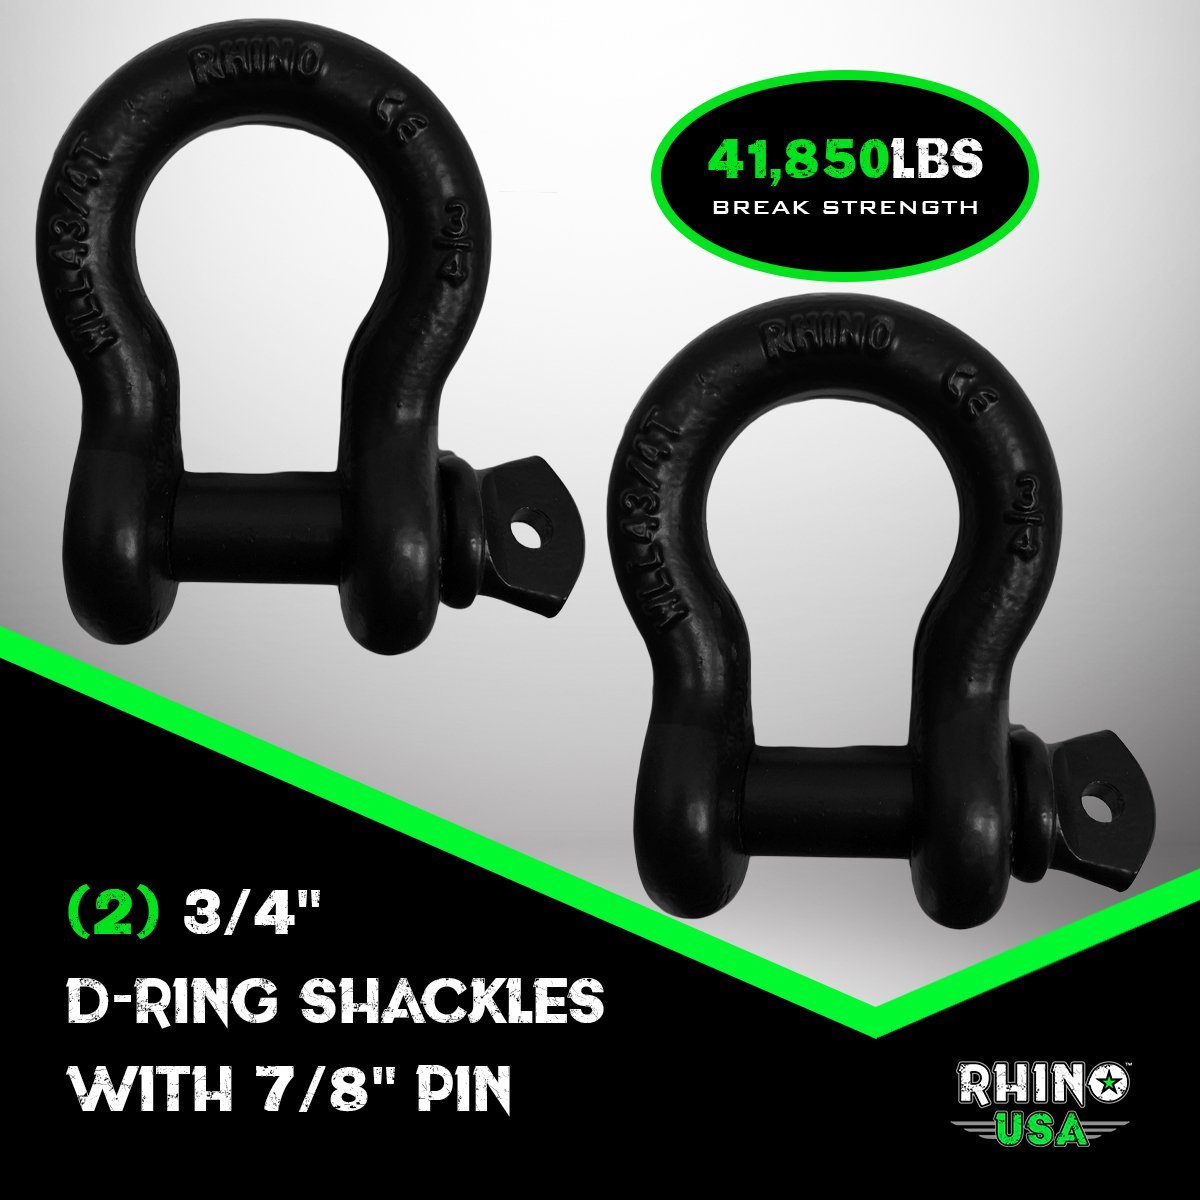 20' Tow Strap & D-Ring Shackle Set Combo Recovery Rhino USA, Inc. 